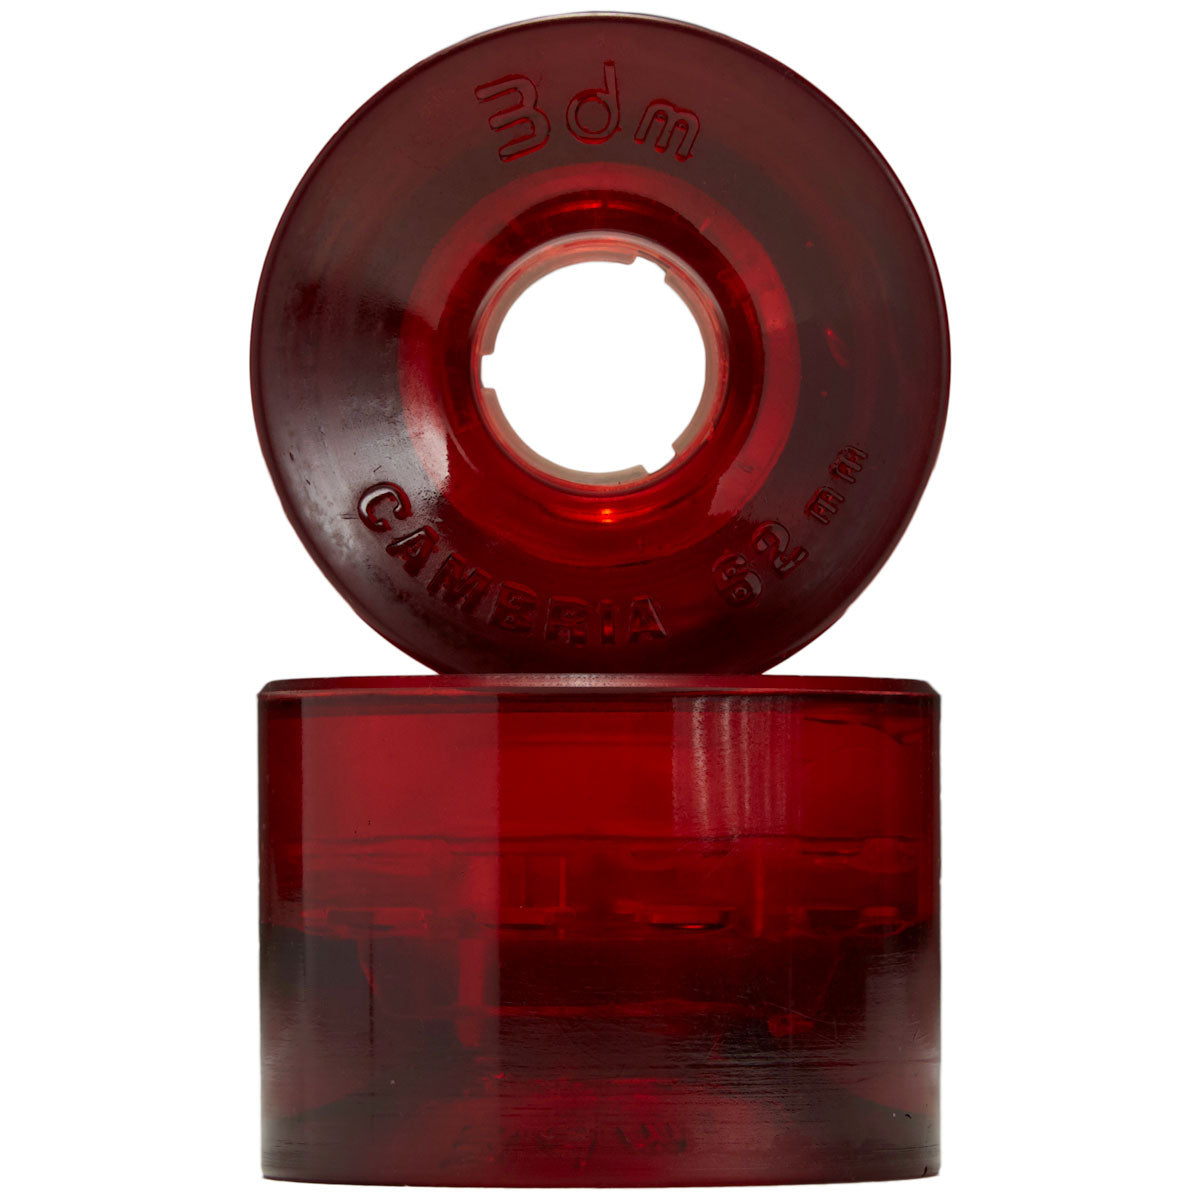 3DM Cambria 80a Longboard Wheels - Clear Red - 62mm image 2